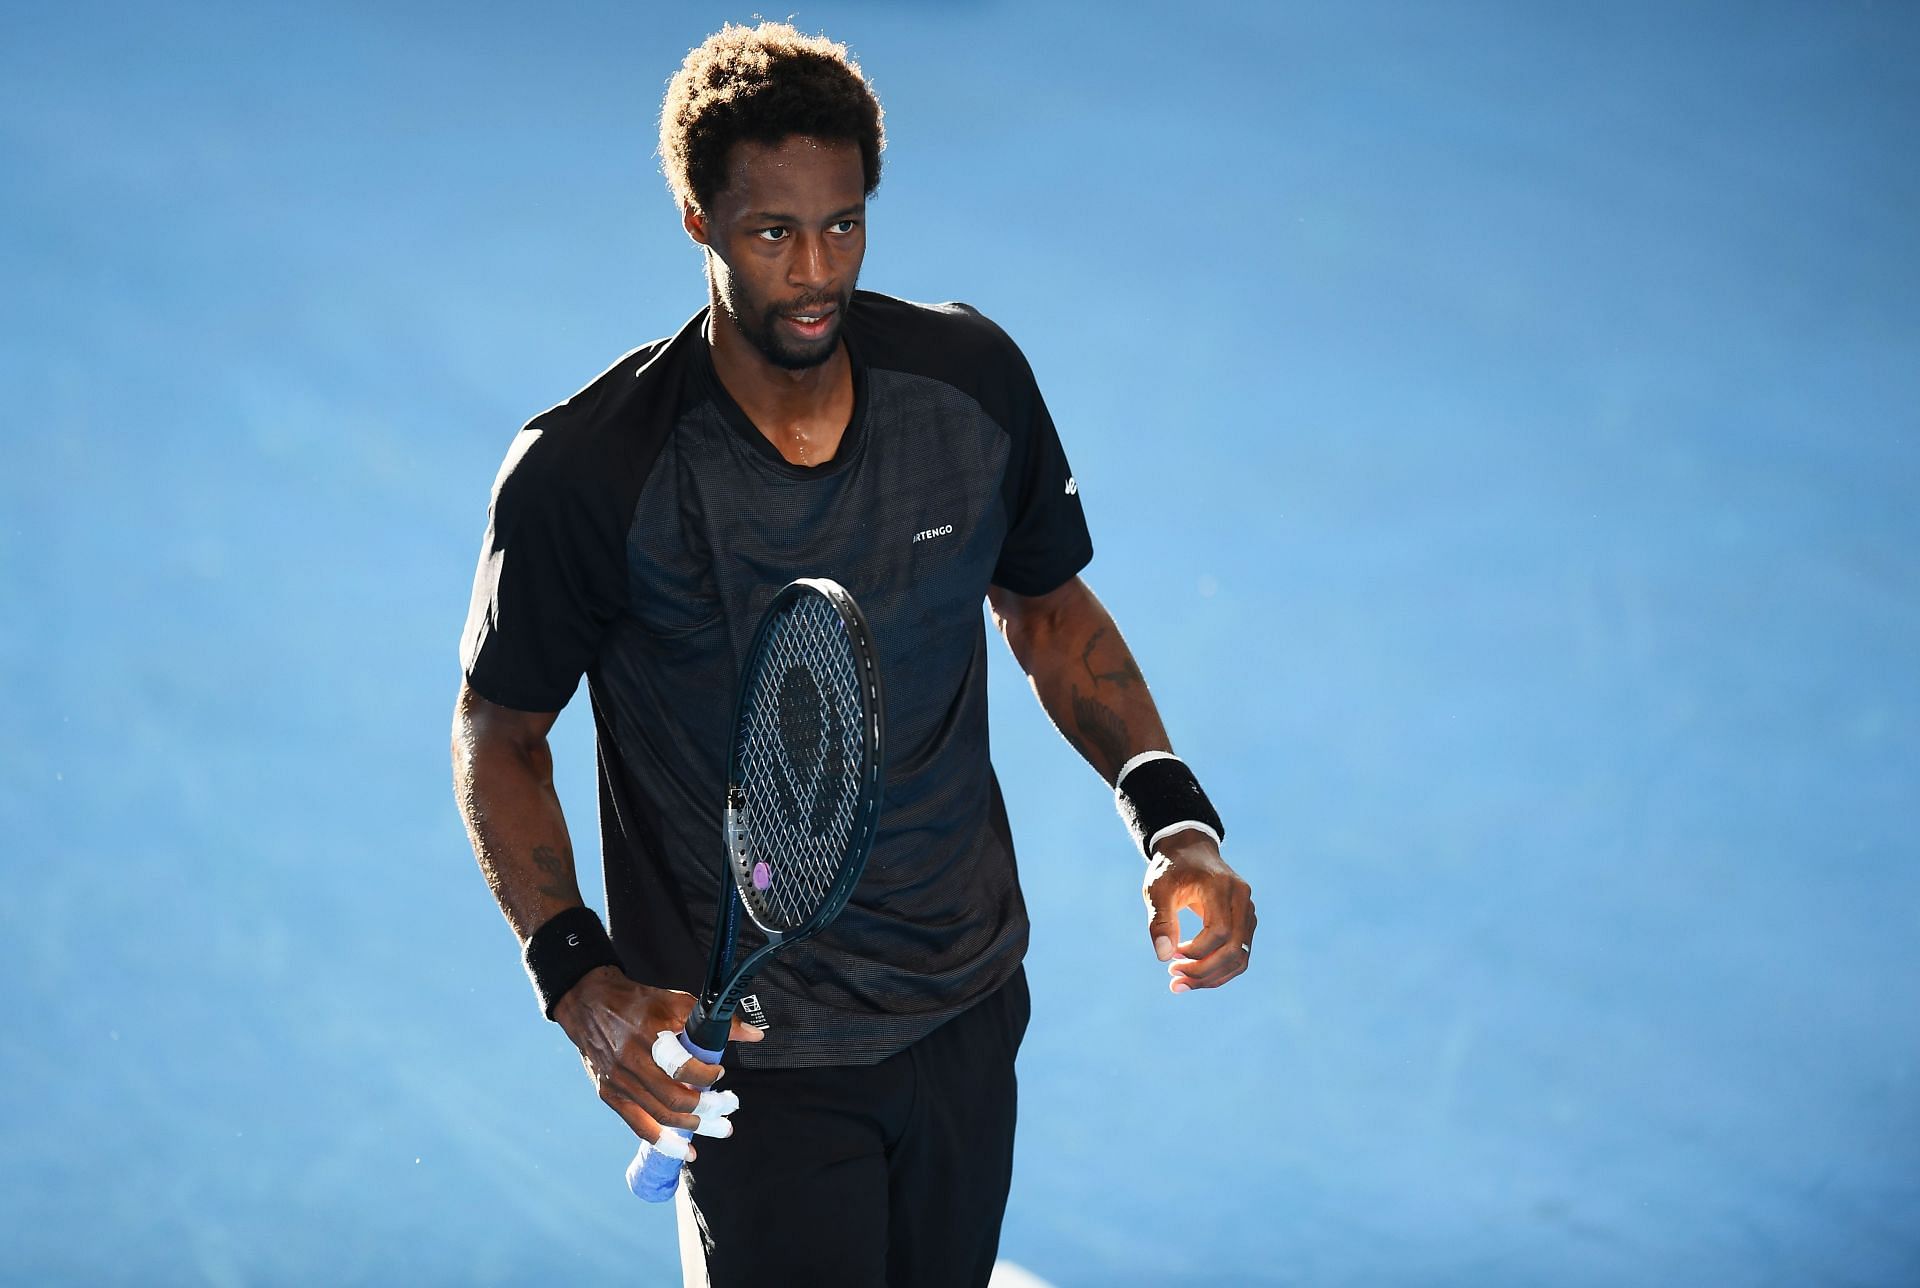 Monfils will be looking to impress in the Adelaide International 2